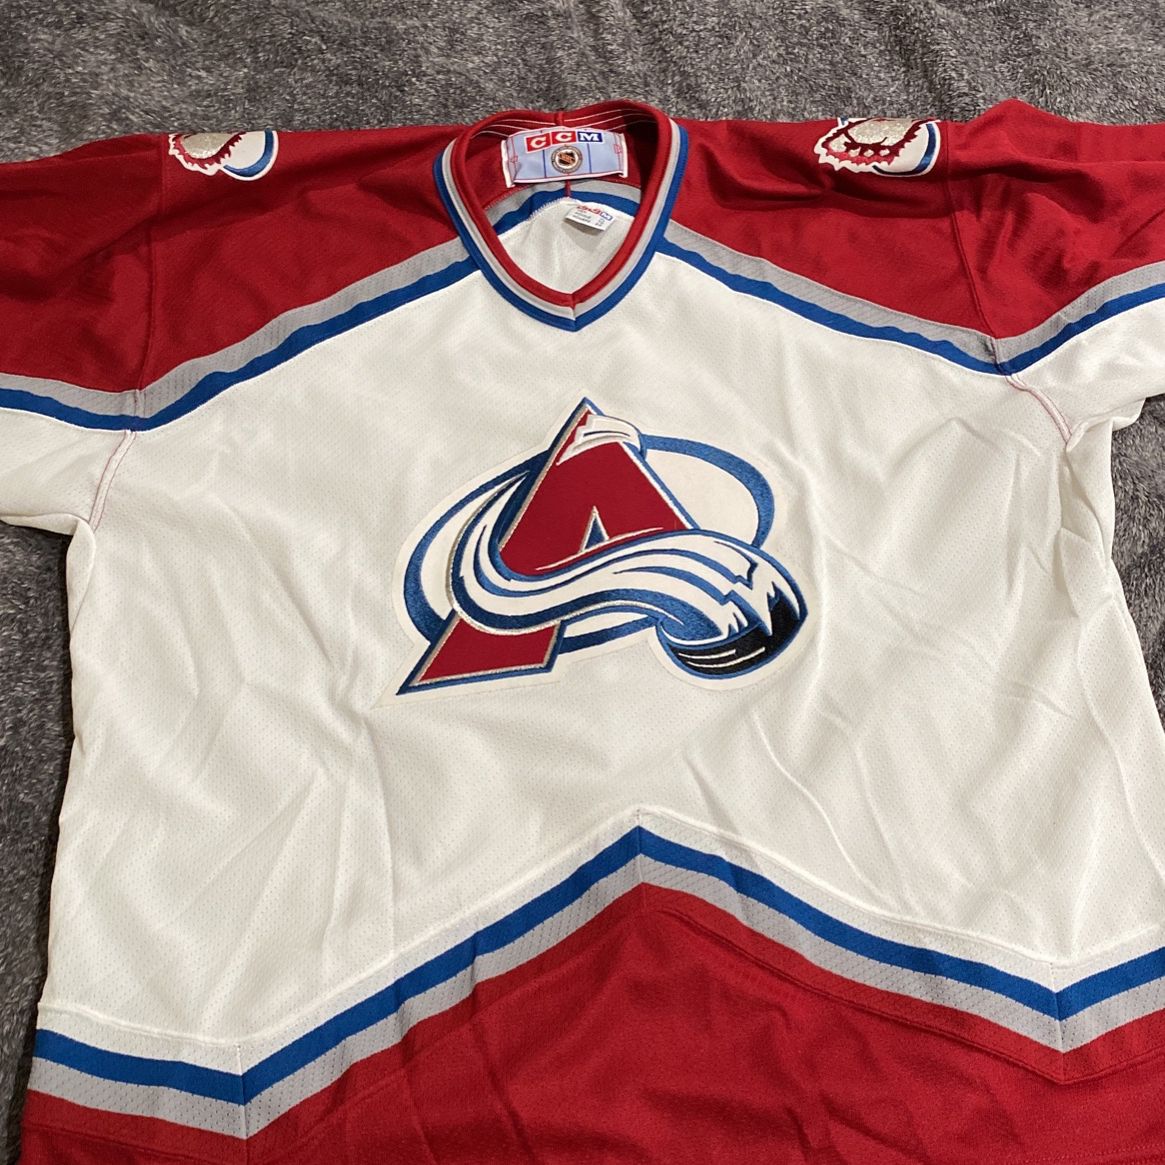 Official Colorado Avalanche Koho Jersey for Sale in Baltimore, MD - OfferUp